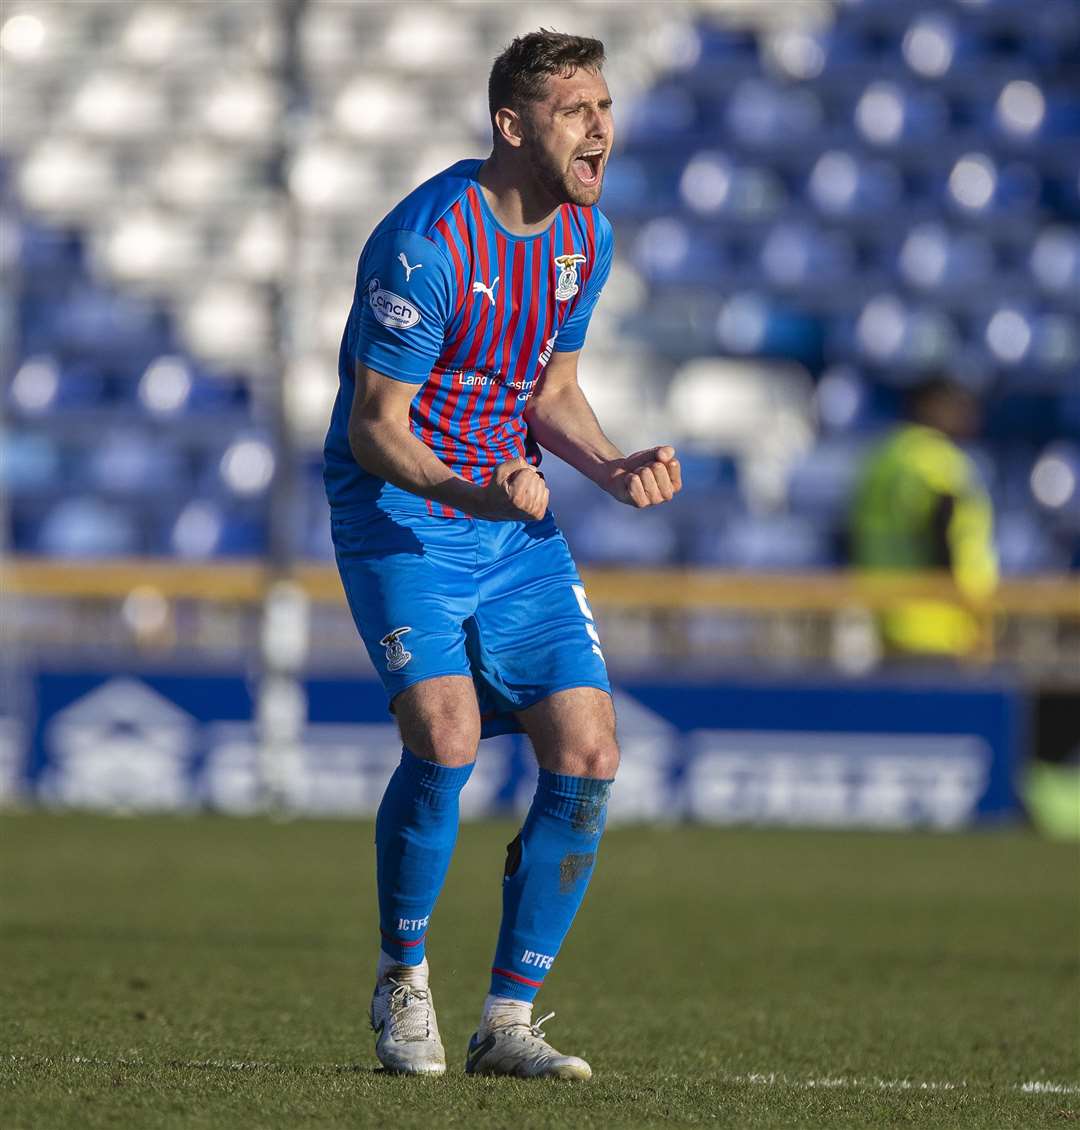 Picture - Ken Macpherson. Inverness CT(2) v Dunfermline(0). 26.03.22. ICT’s Robbie Deas celebartes to fans after the final whistle.